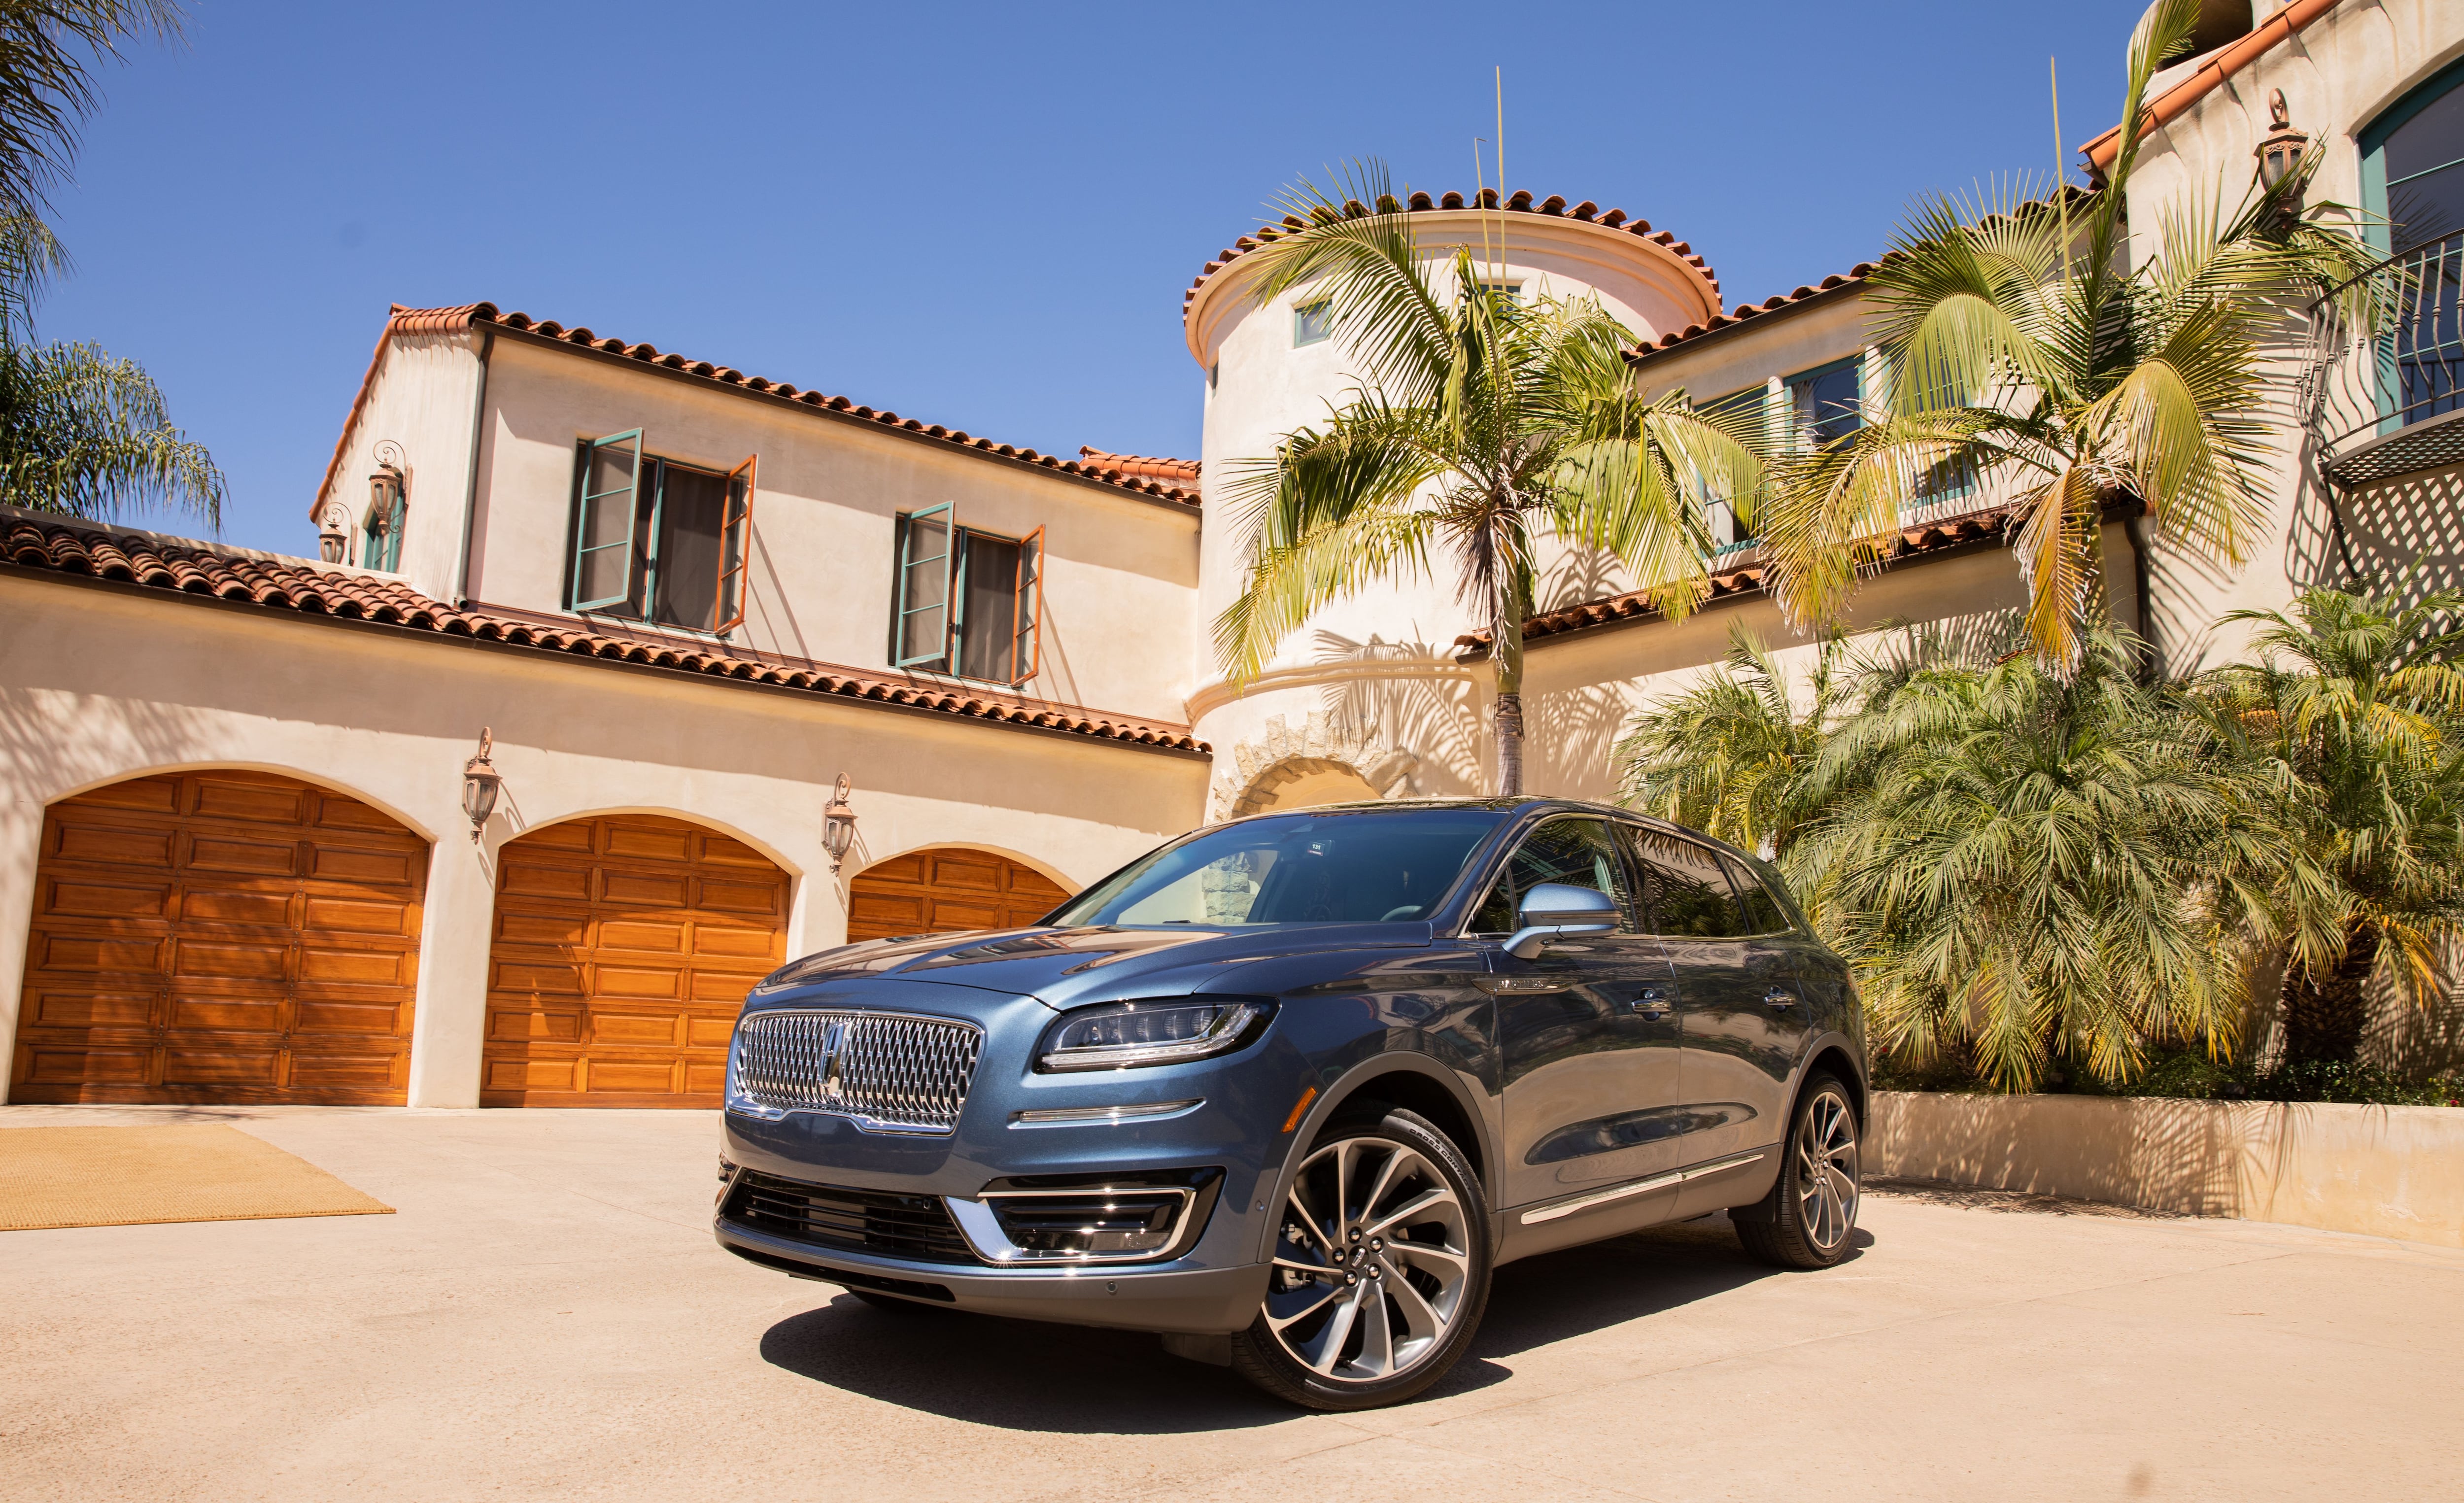 review: lincoln nautilus is comfort and beauty in a suv package